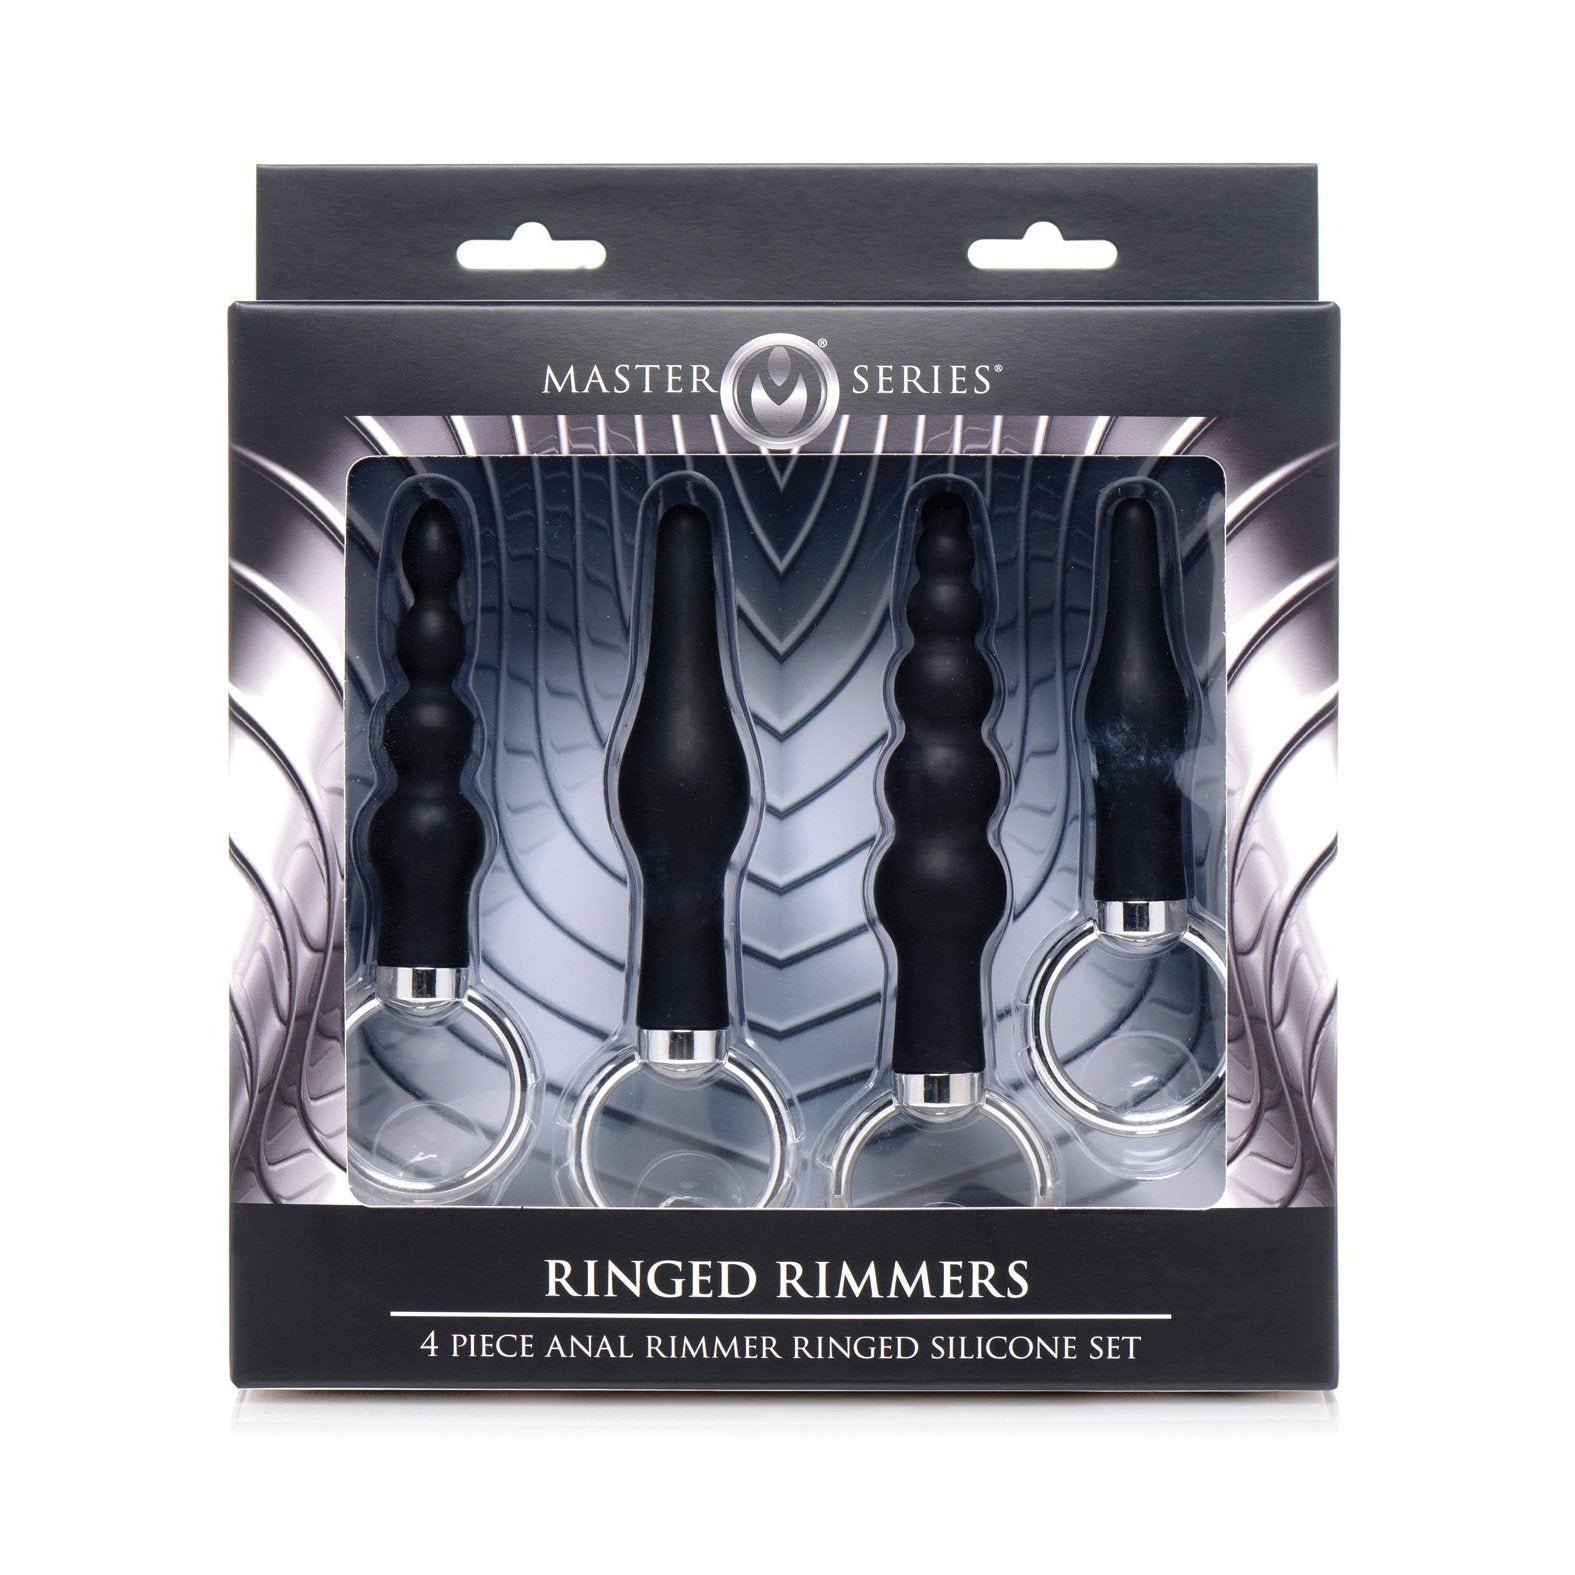 Master Series 4 Piece Anal Rimmer Ringed Silicone Kit